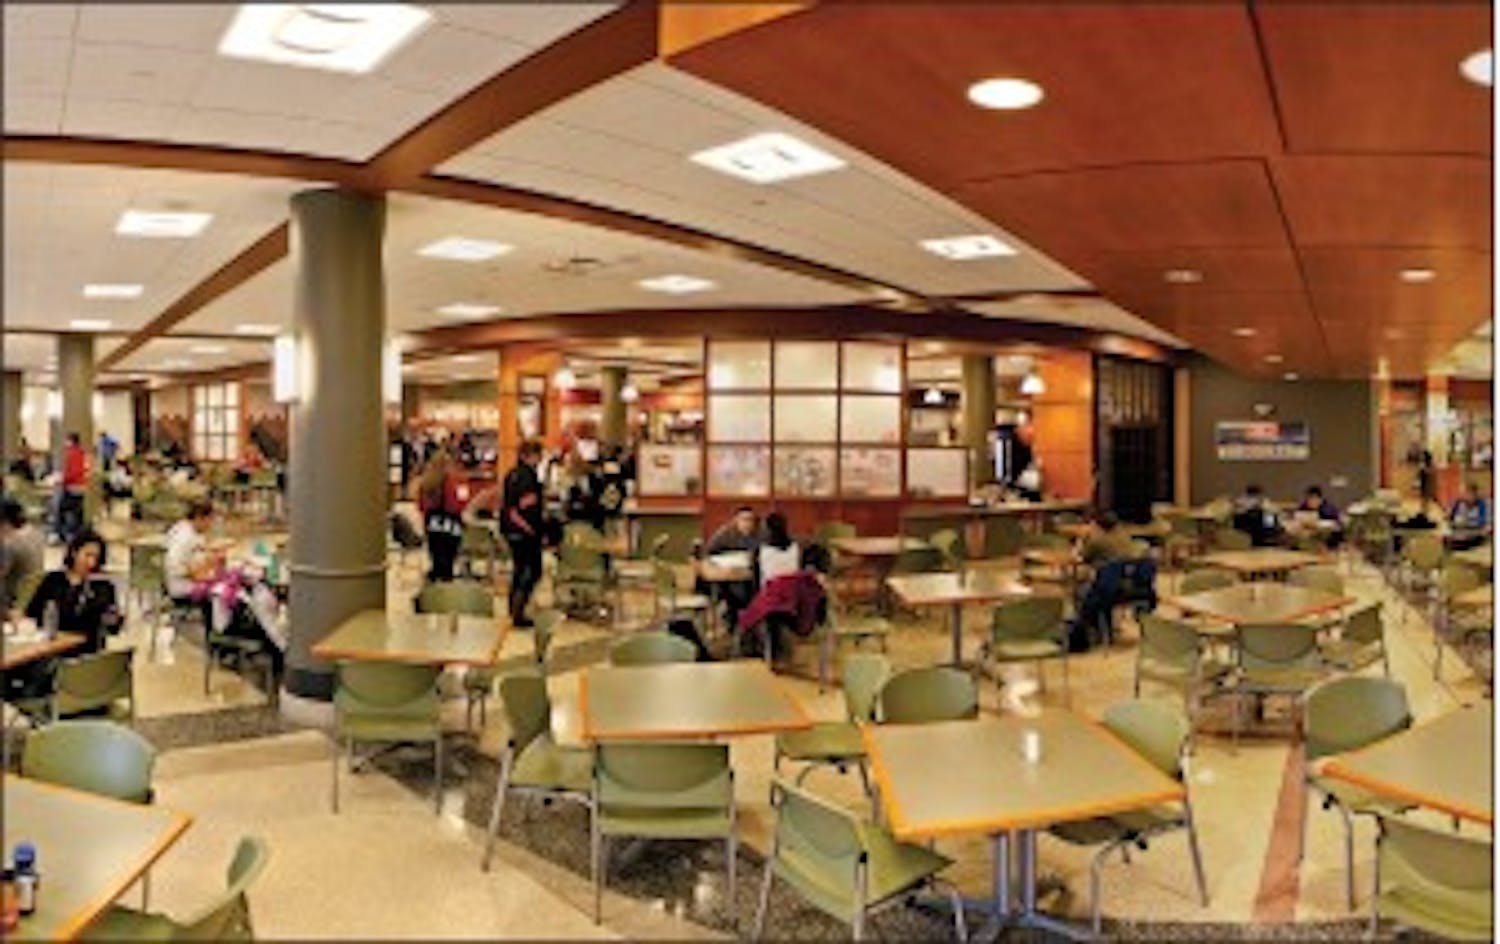 Baker University Center serves as hotspot for student activity, offers variety of resources  